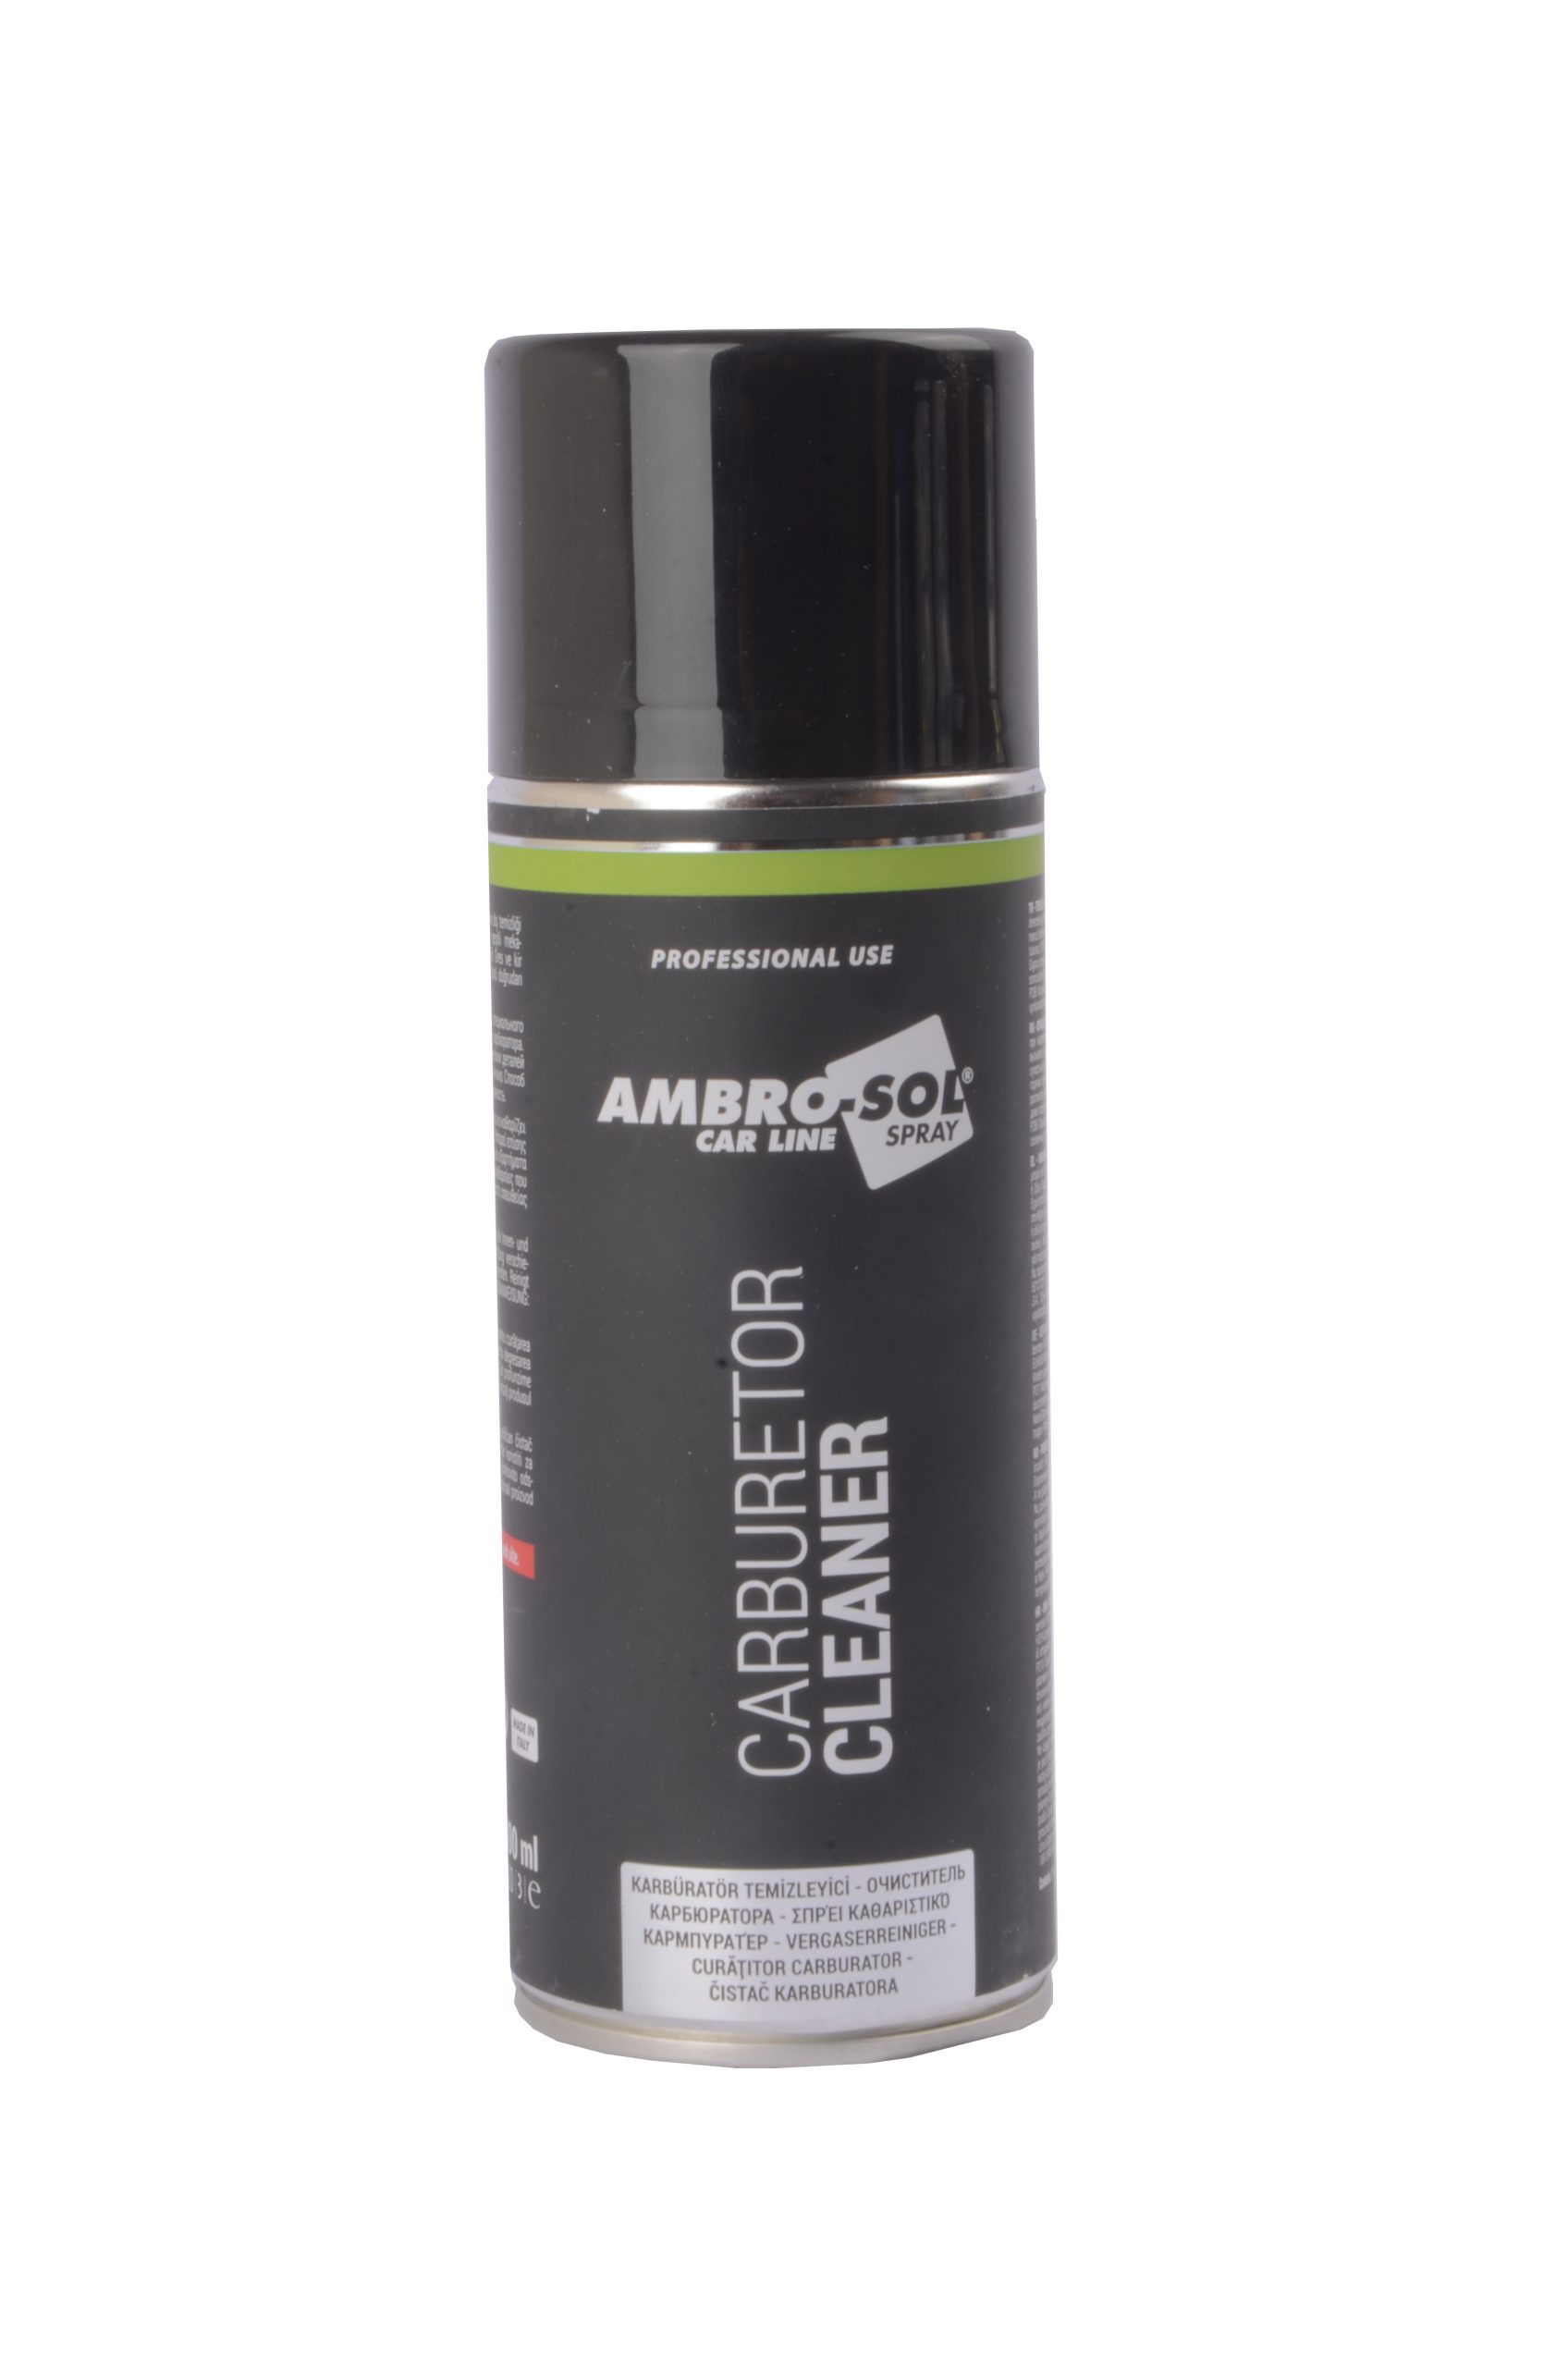 Ambrosol 
	
	Carburetor Cleaner
	 |  Hardware and Tools |  Vehicle Cleaning |  Industrial Sprays |  Vehicle Supplies